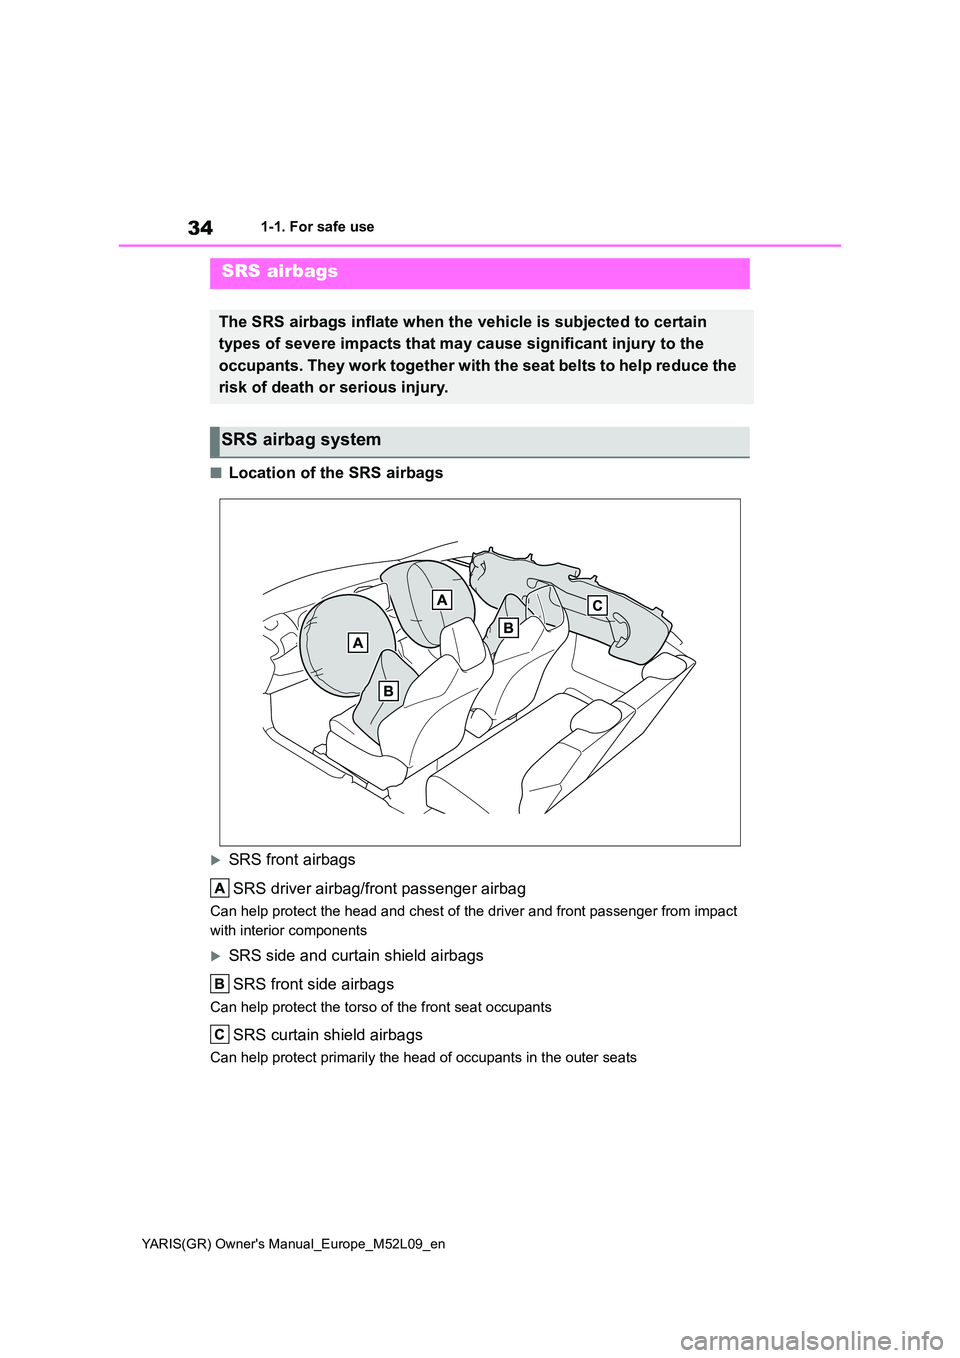 TOYOTA GR YARIS 2020  Owners Manual (in English) 34
YARIS(GR) Owners Manual_Europe_M52L09_en
1-1. For safe use
■Location of the SRS airbags
SRS front airbags 
SRS driver airbag/front passenger airbag
Can help protect the head and chest of the 